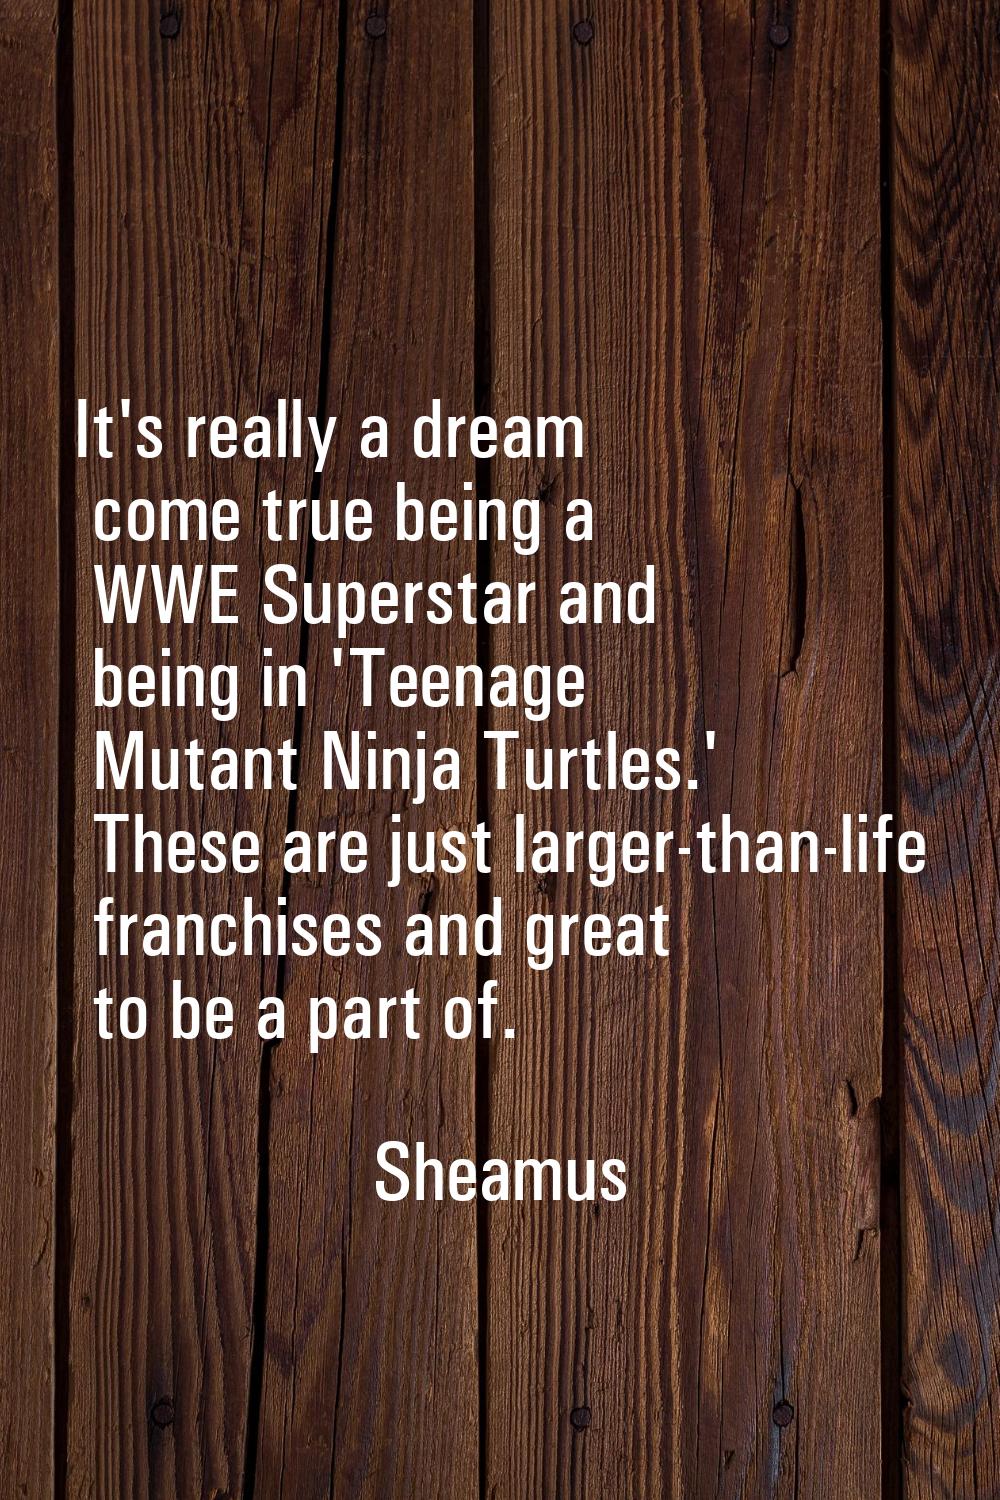 It's really a dream come true being a WWE Superstar and being in 'Teenage Mutant Ninja Turtles.' Th